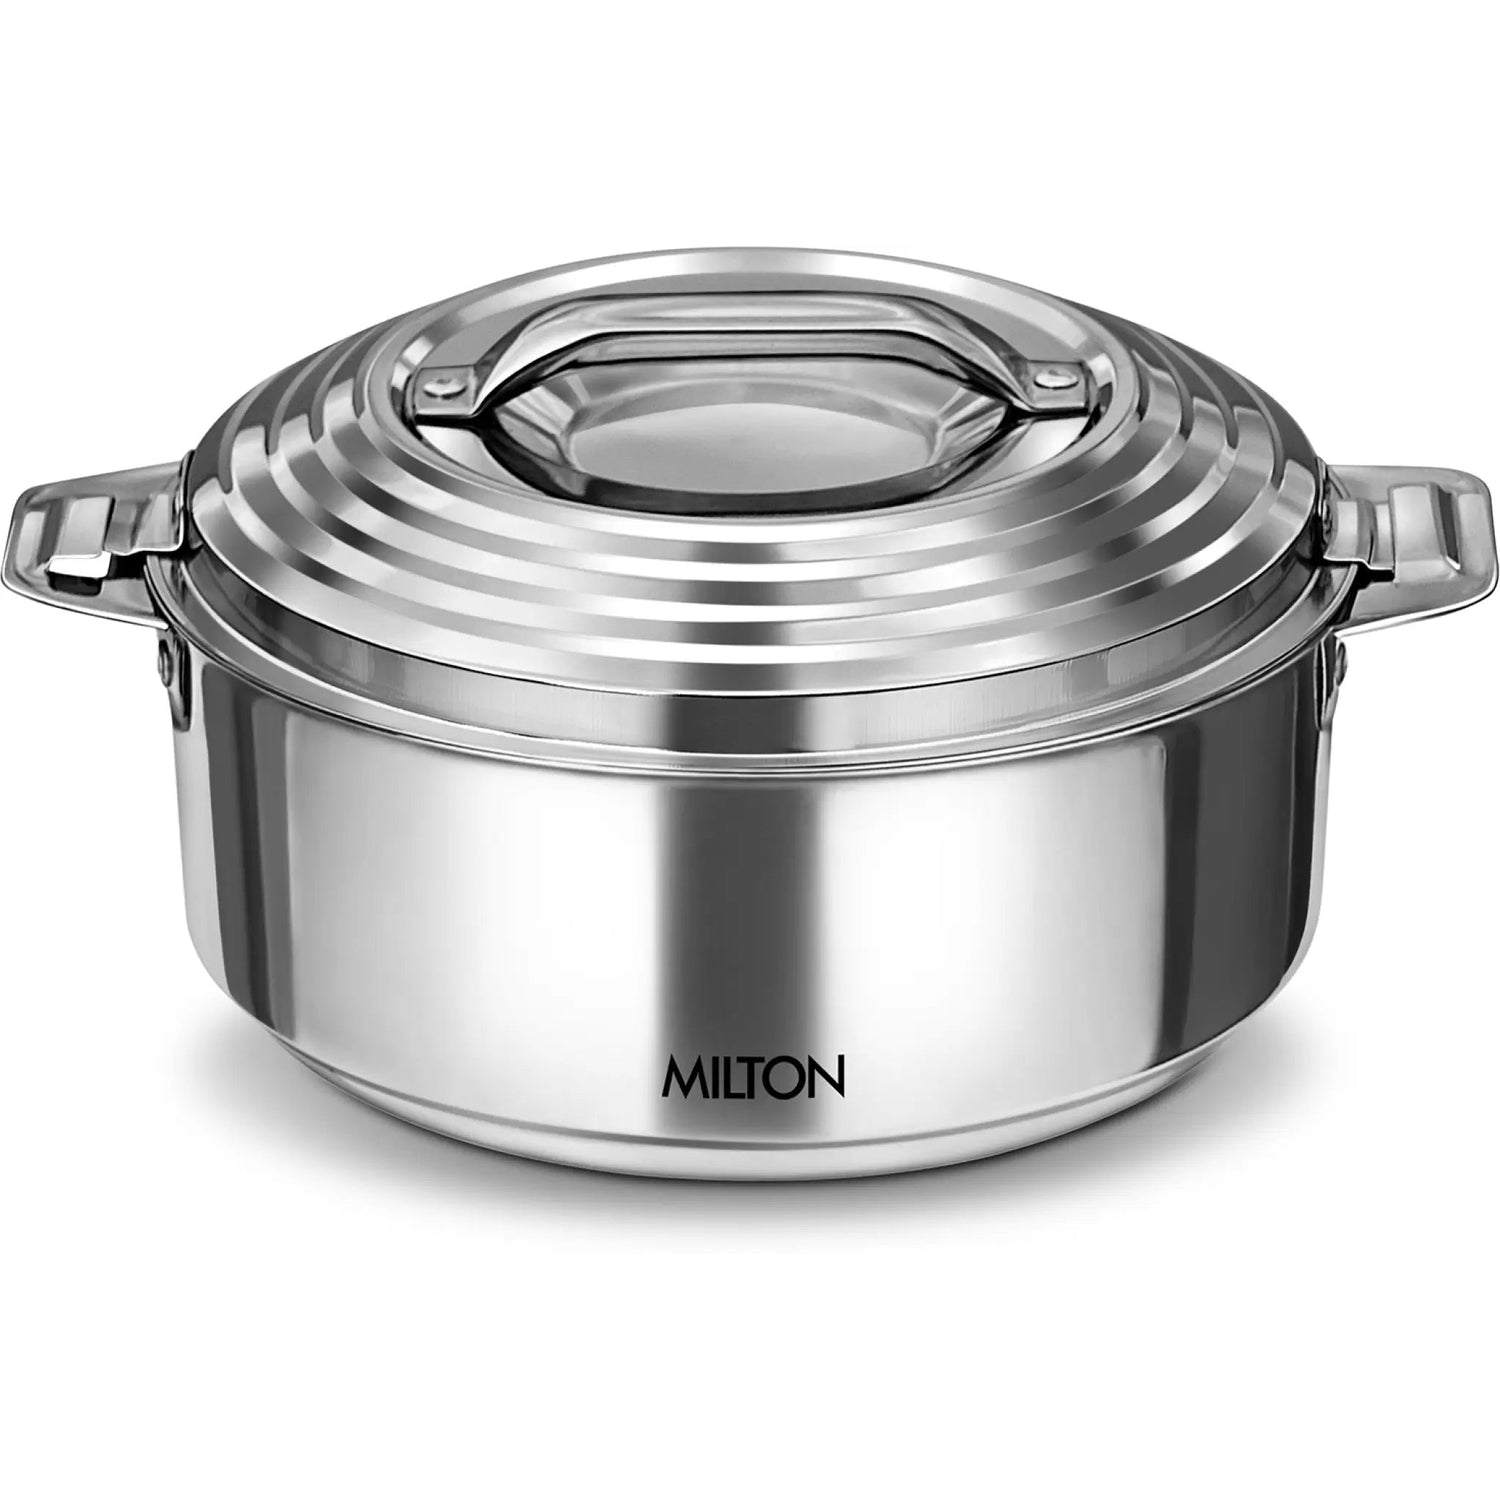 Milton Galaxia 1000 Insulated Stainless Steel Casserole